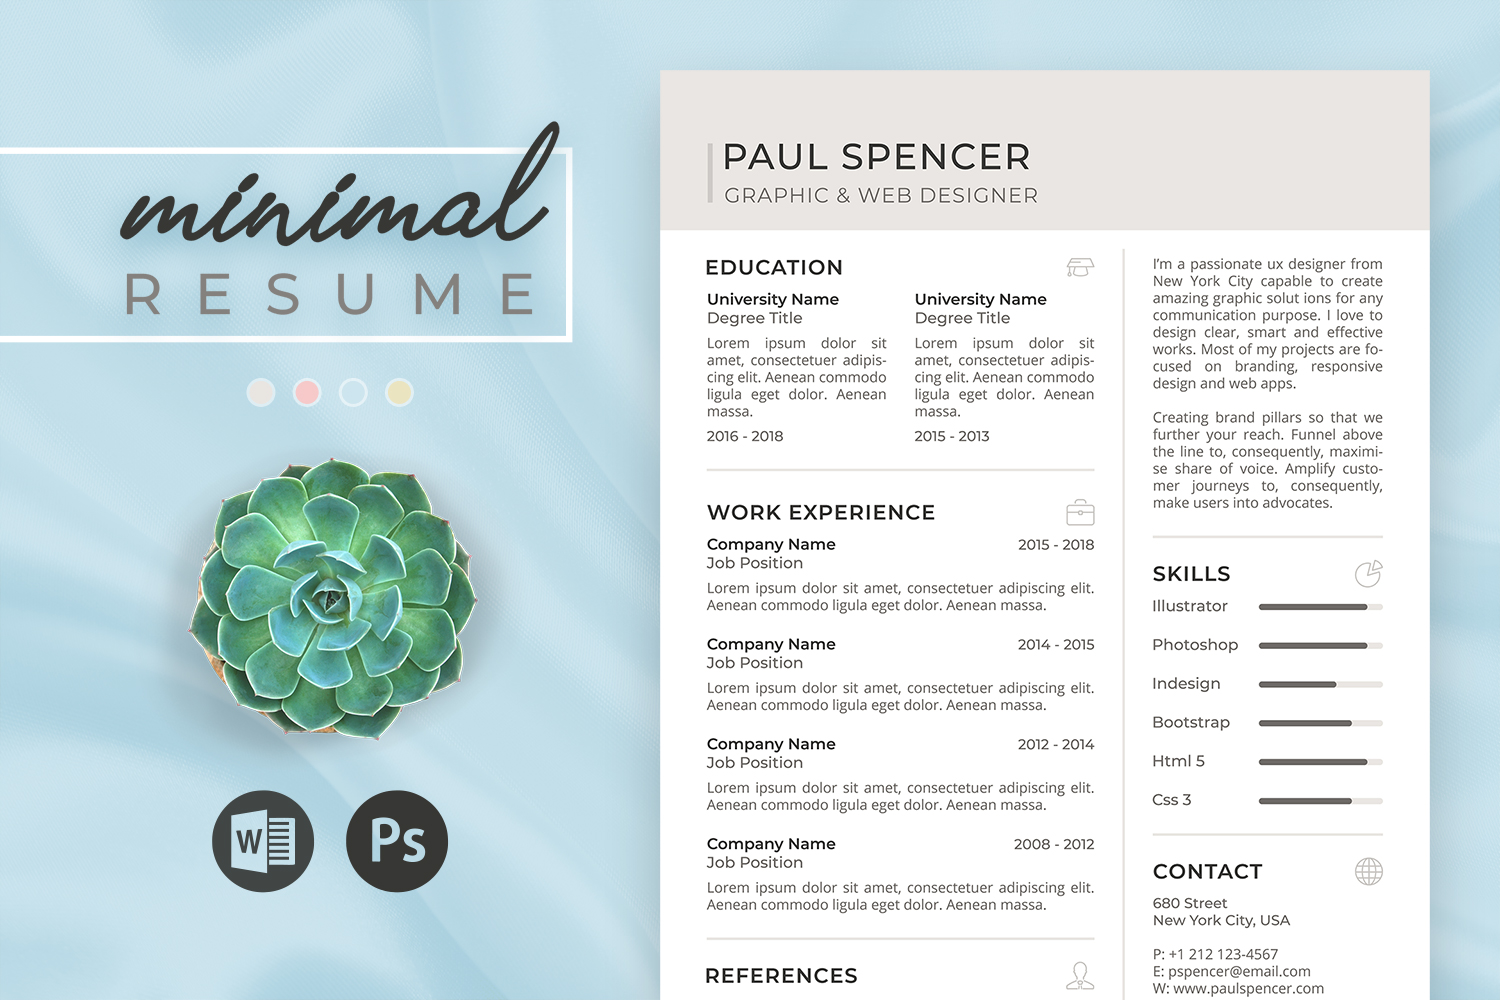 Minimal Resume - Editable CV Resume with Cover Letter